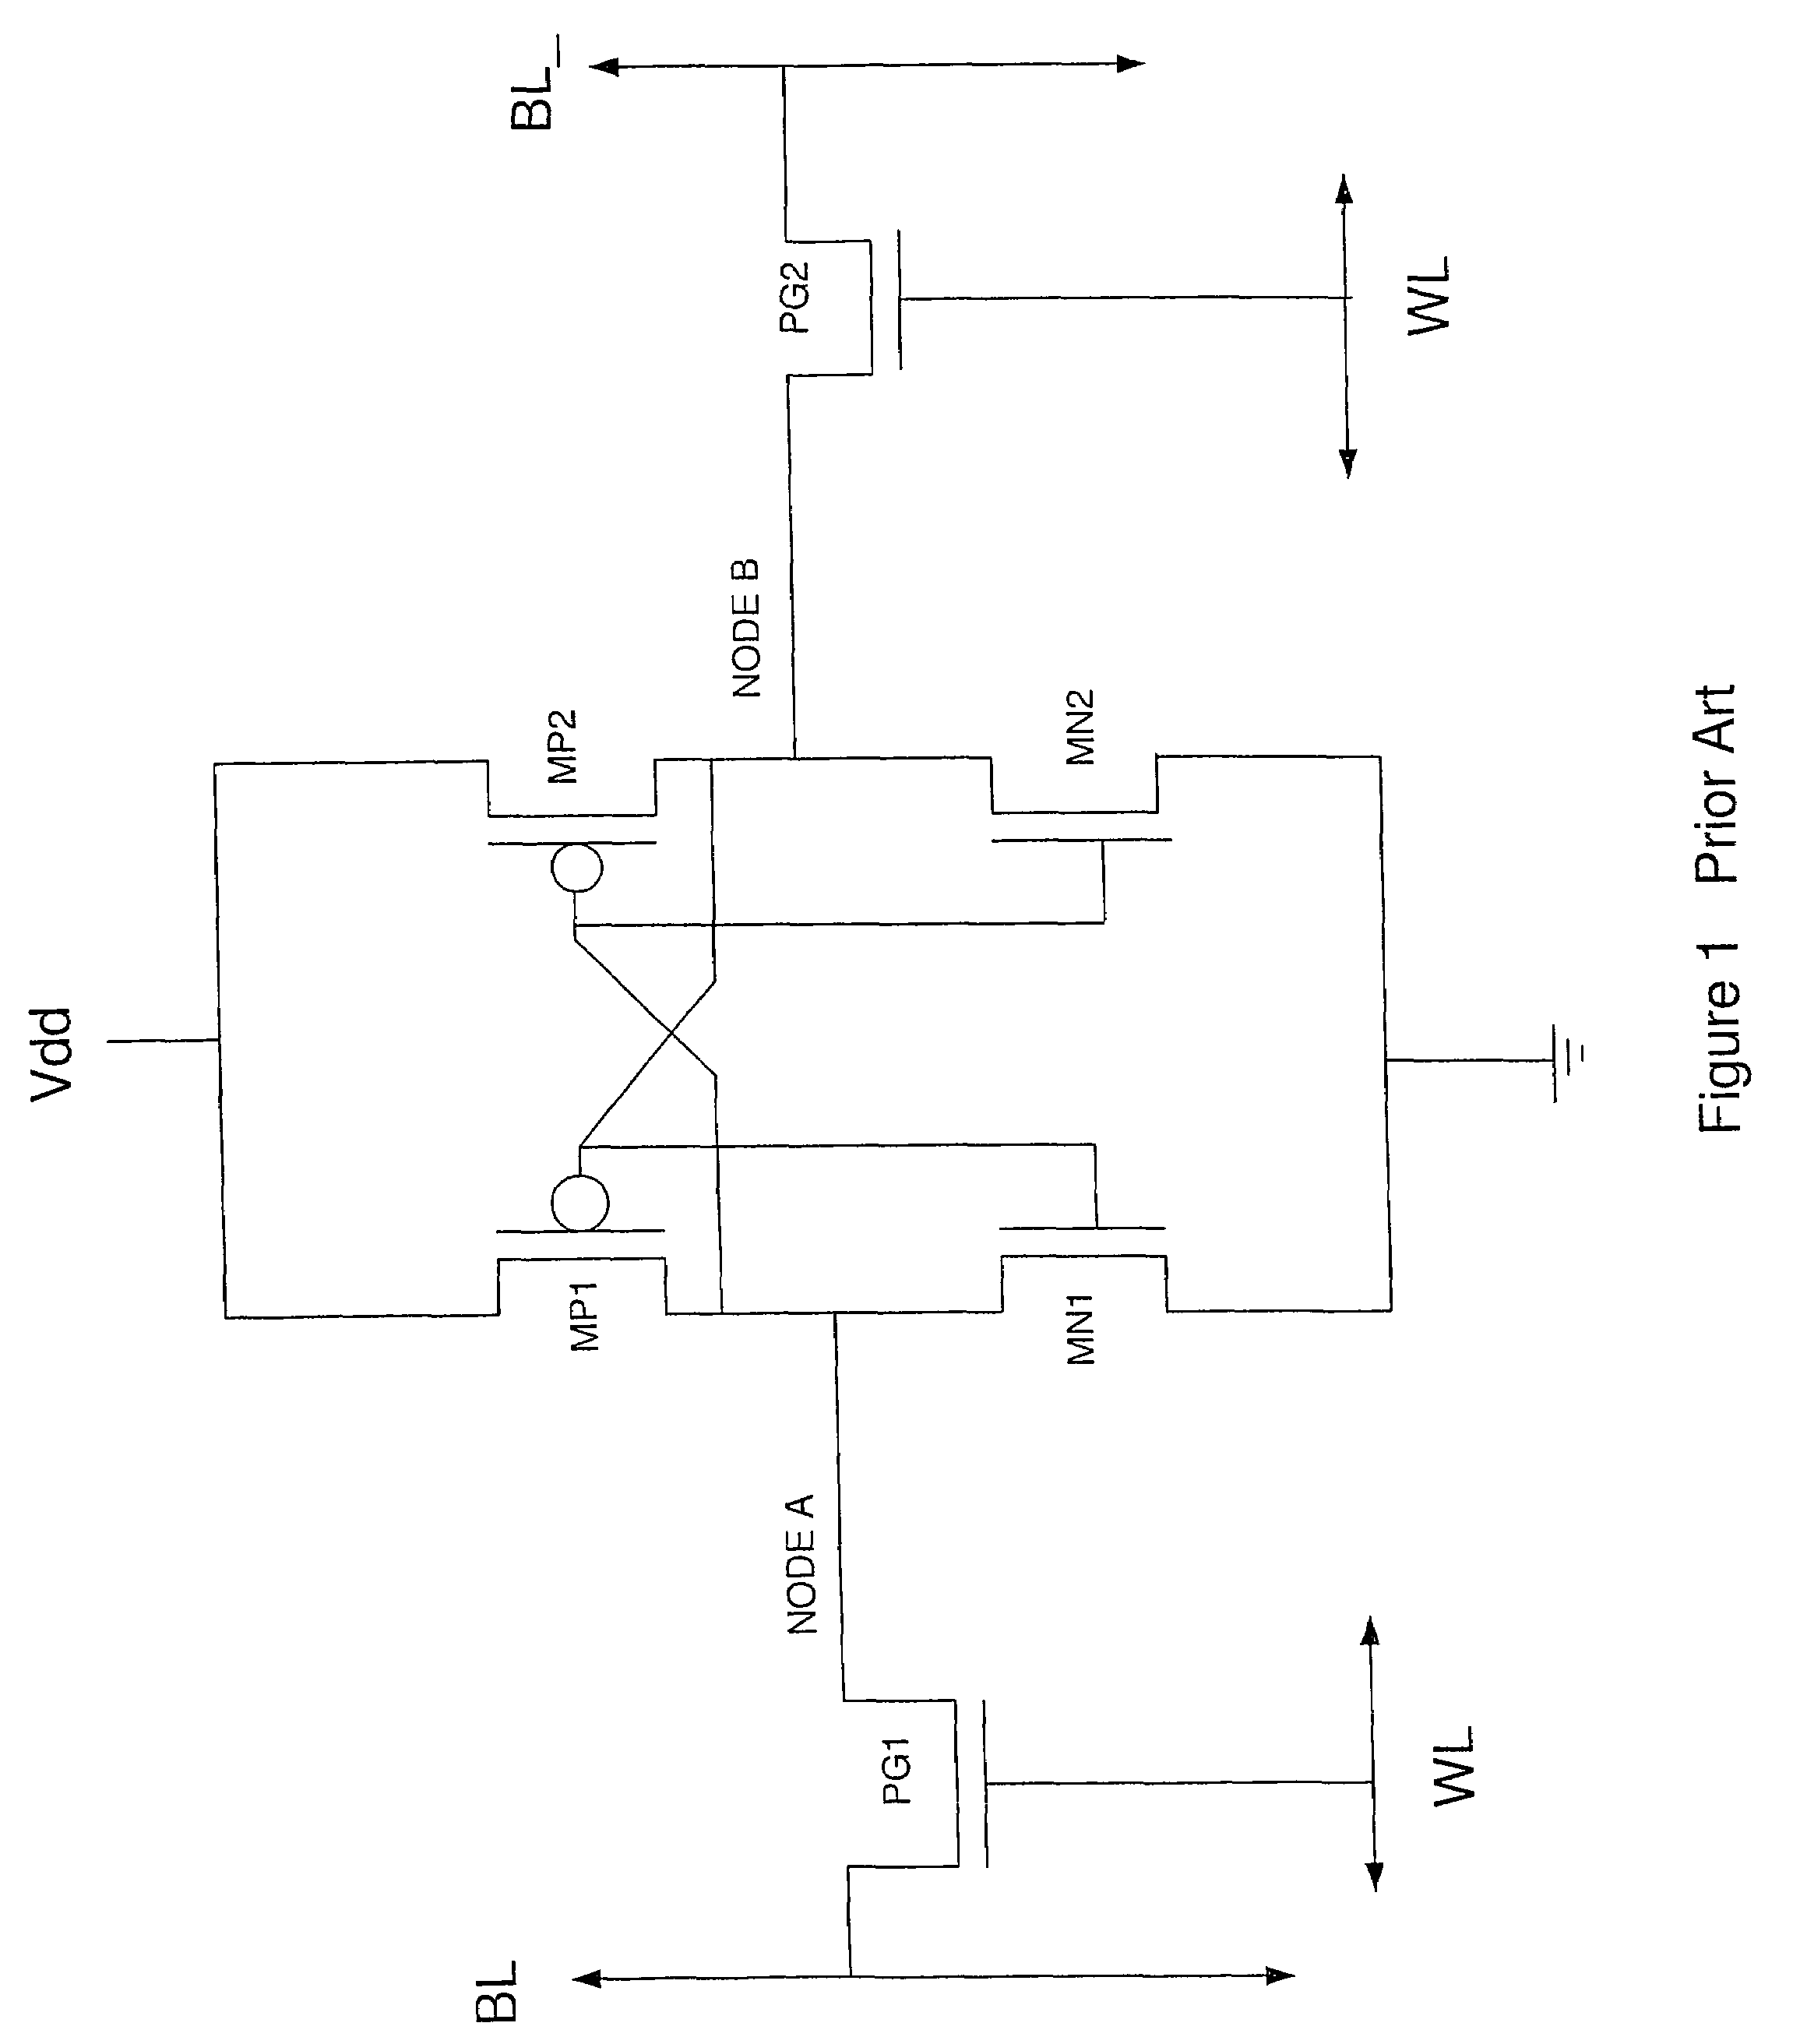 Circuit and method for an SRAM with reduced power consumption